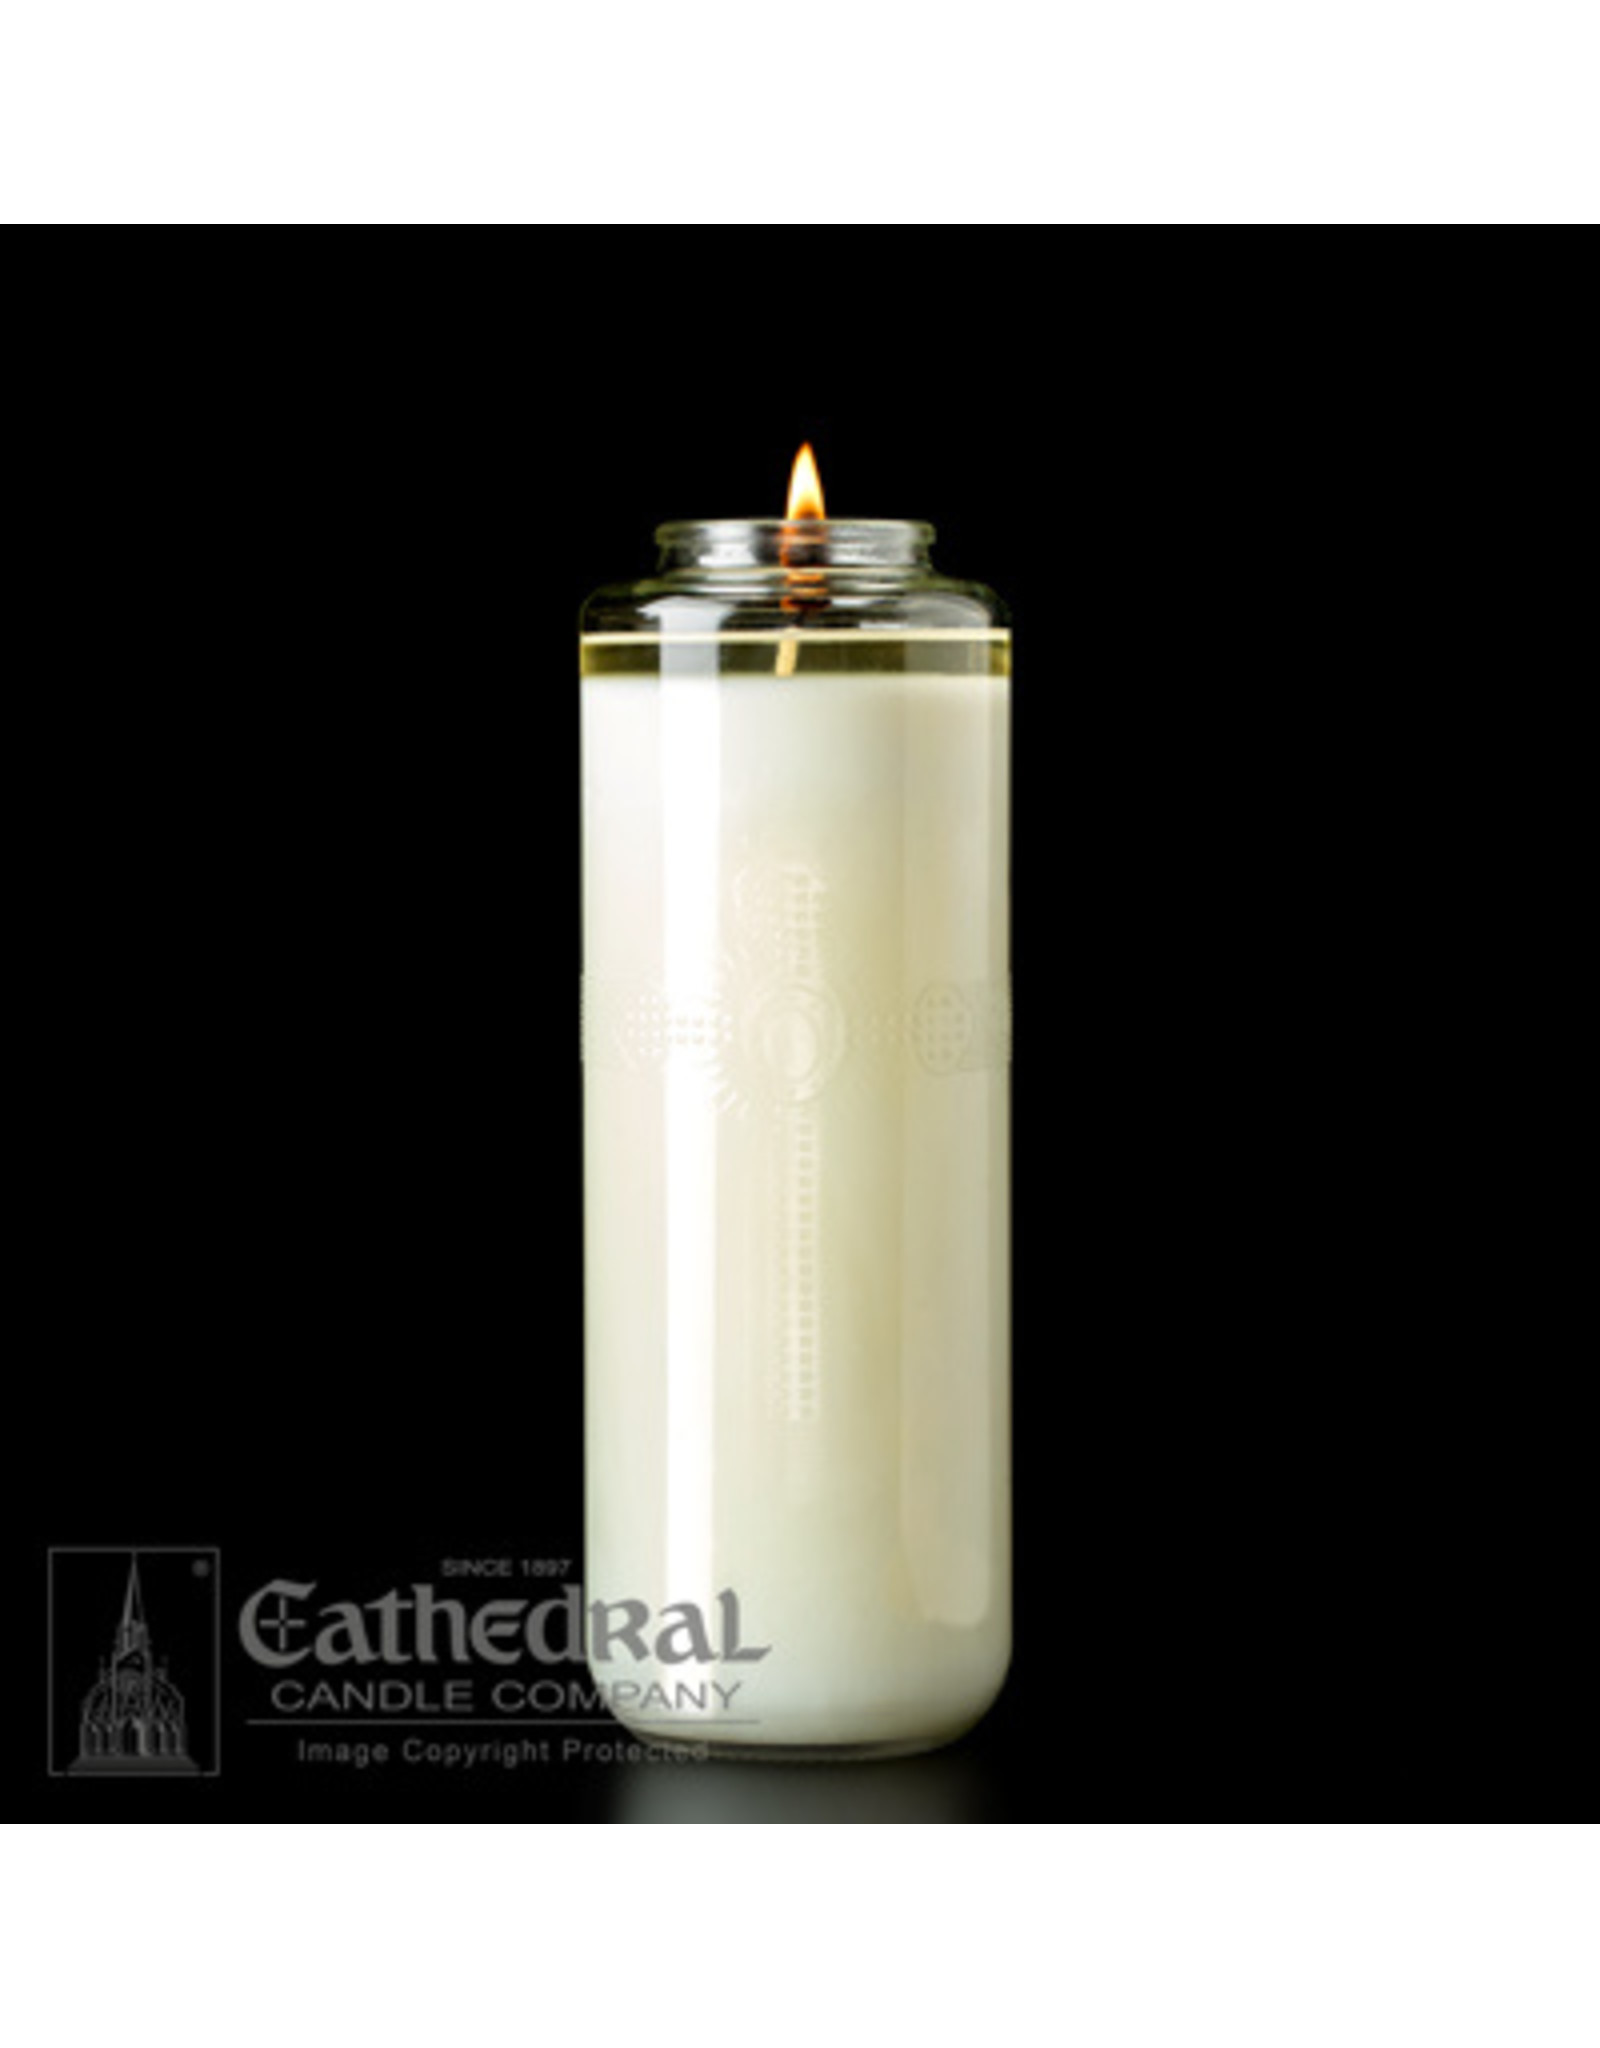 Cathedral Candle 8-Day 51% Beeswax "Domus Christi" Candles (12)